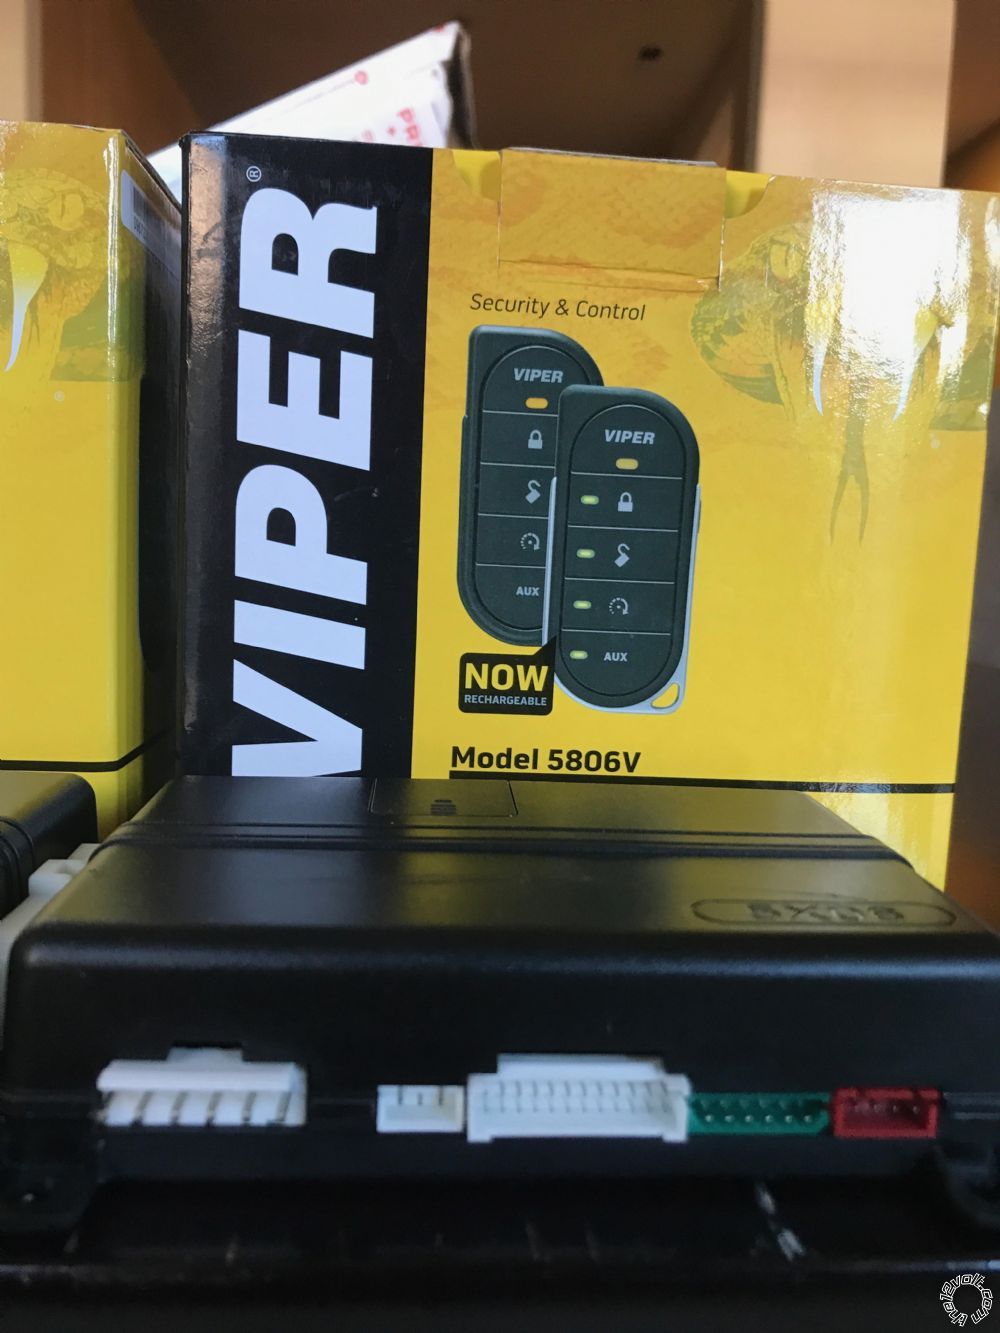 Can Anyone Explain the Viper 5806v Shut Off Switch? -- posted image.